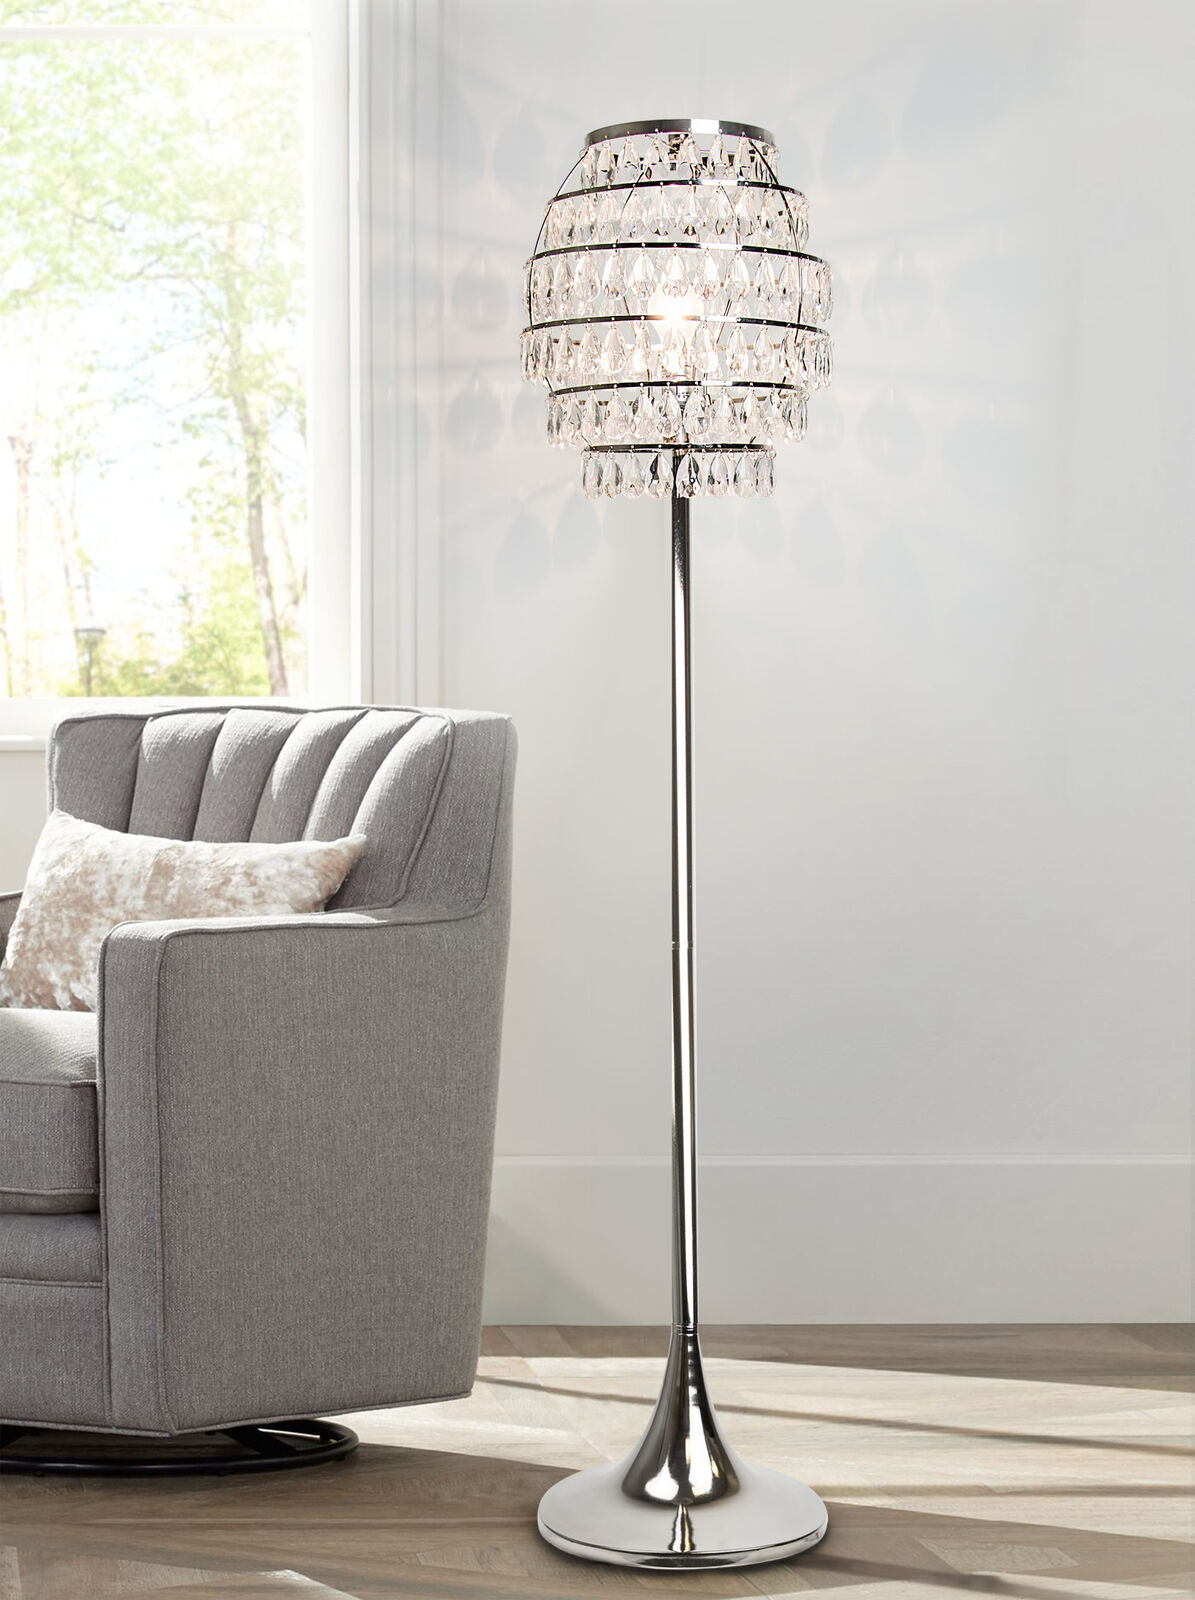 Grandview Gallery 6325 Polished Nickel Modern Bling Floor Lamp 6 Tier Shade within size 1195 X 1600